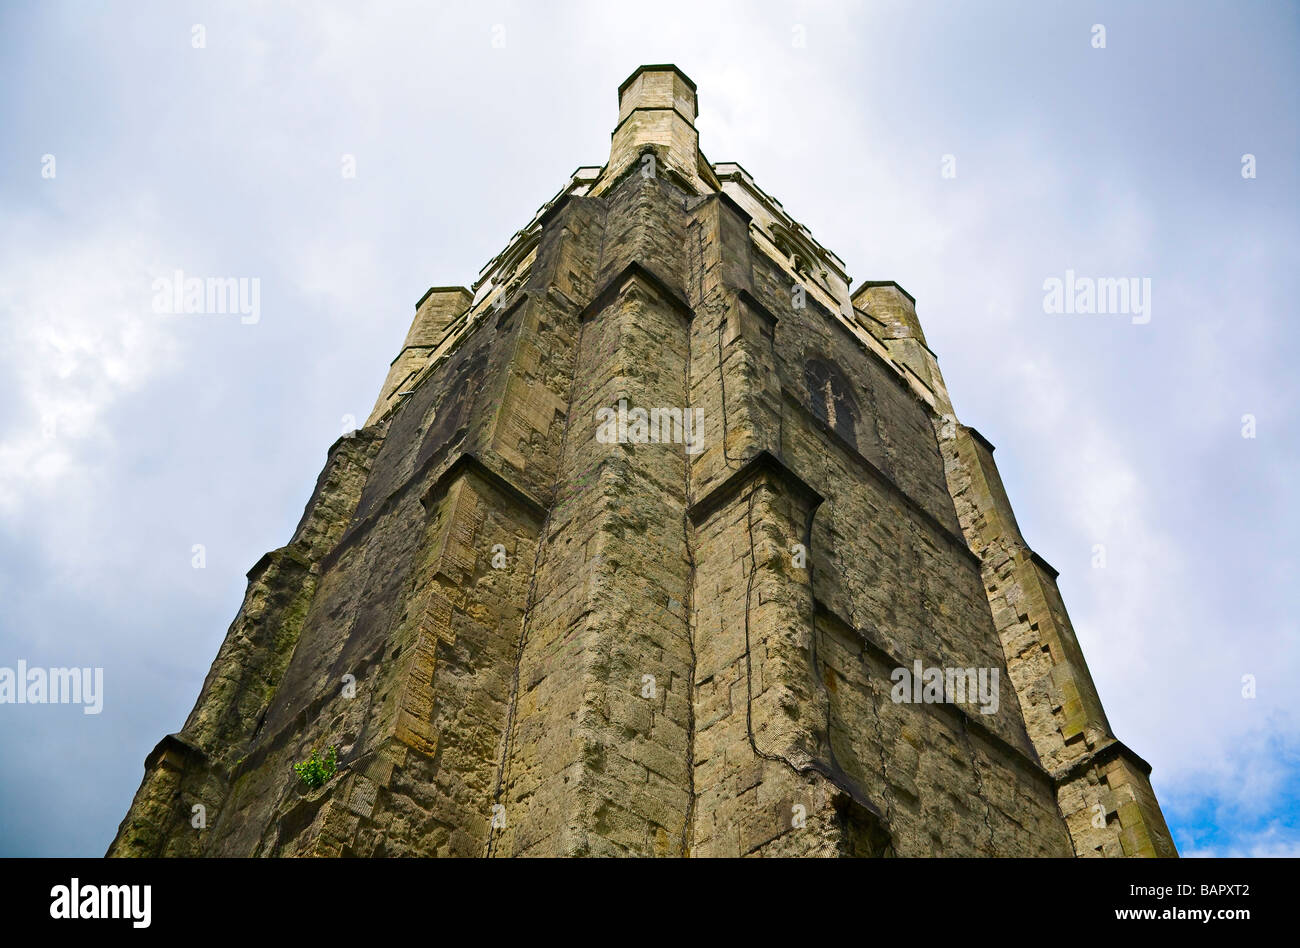 Looking up at the Bell tower (circa 1400) at Chichester Cathedral, West Sussex, UK Stock Photo